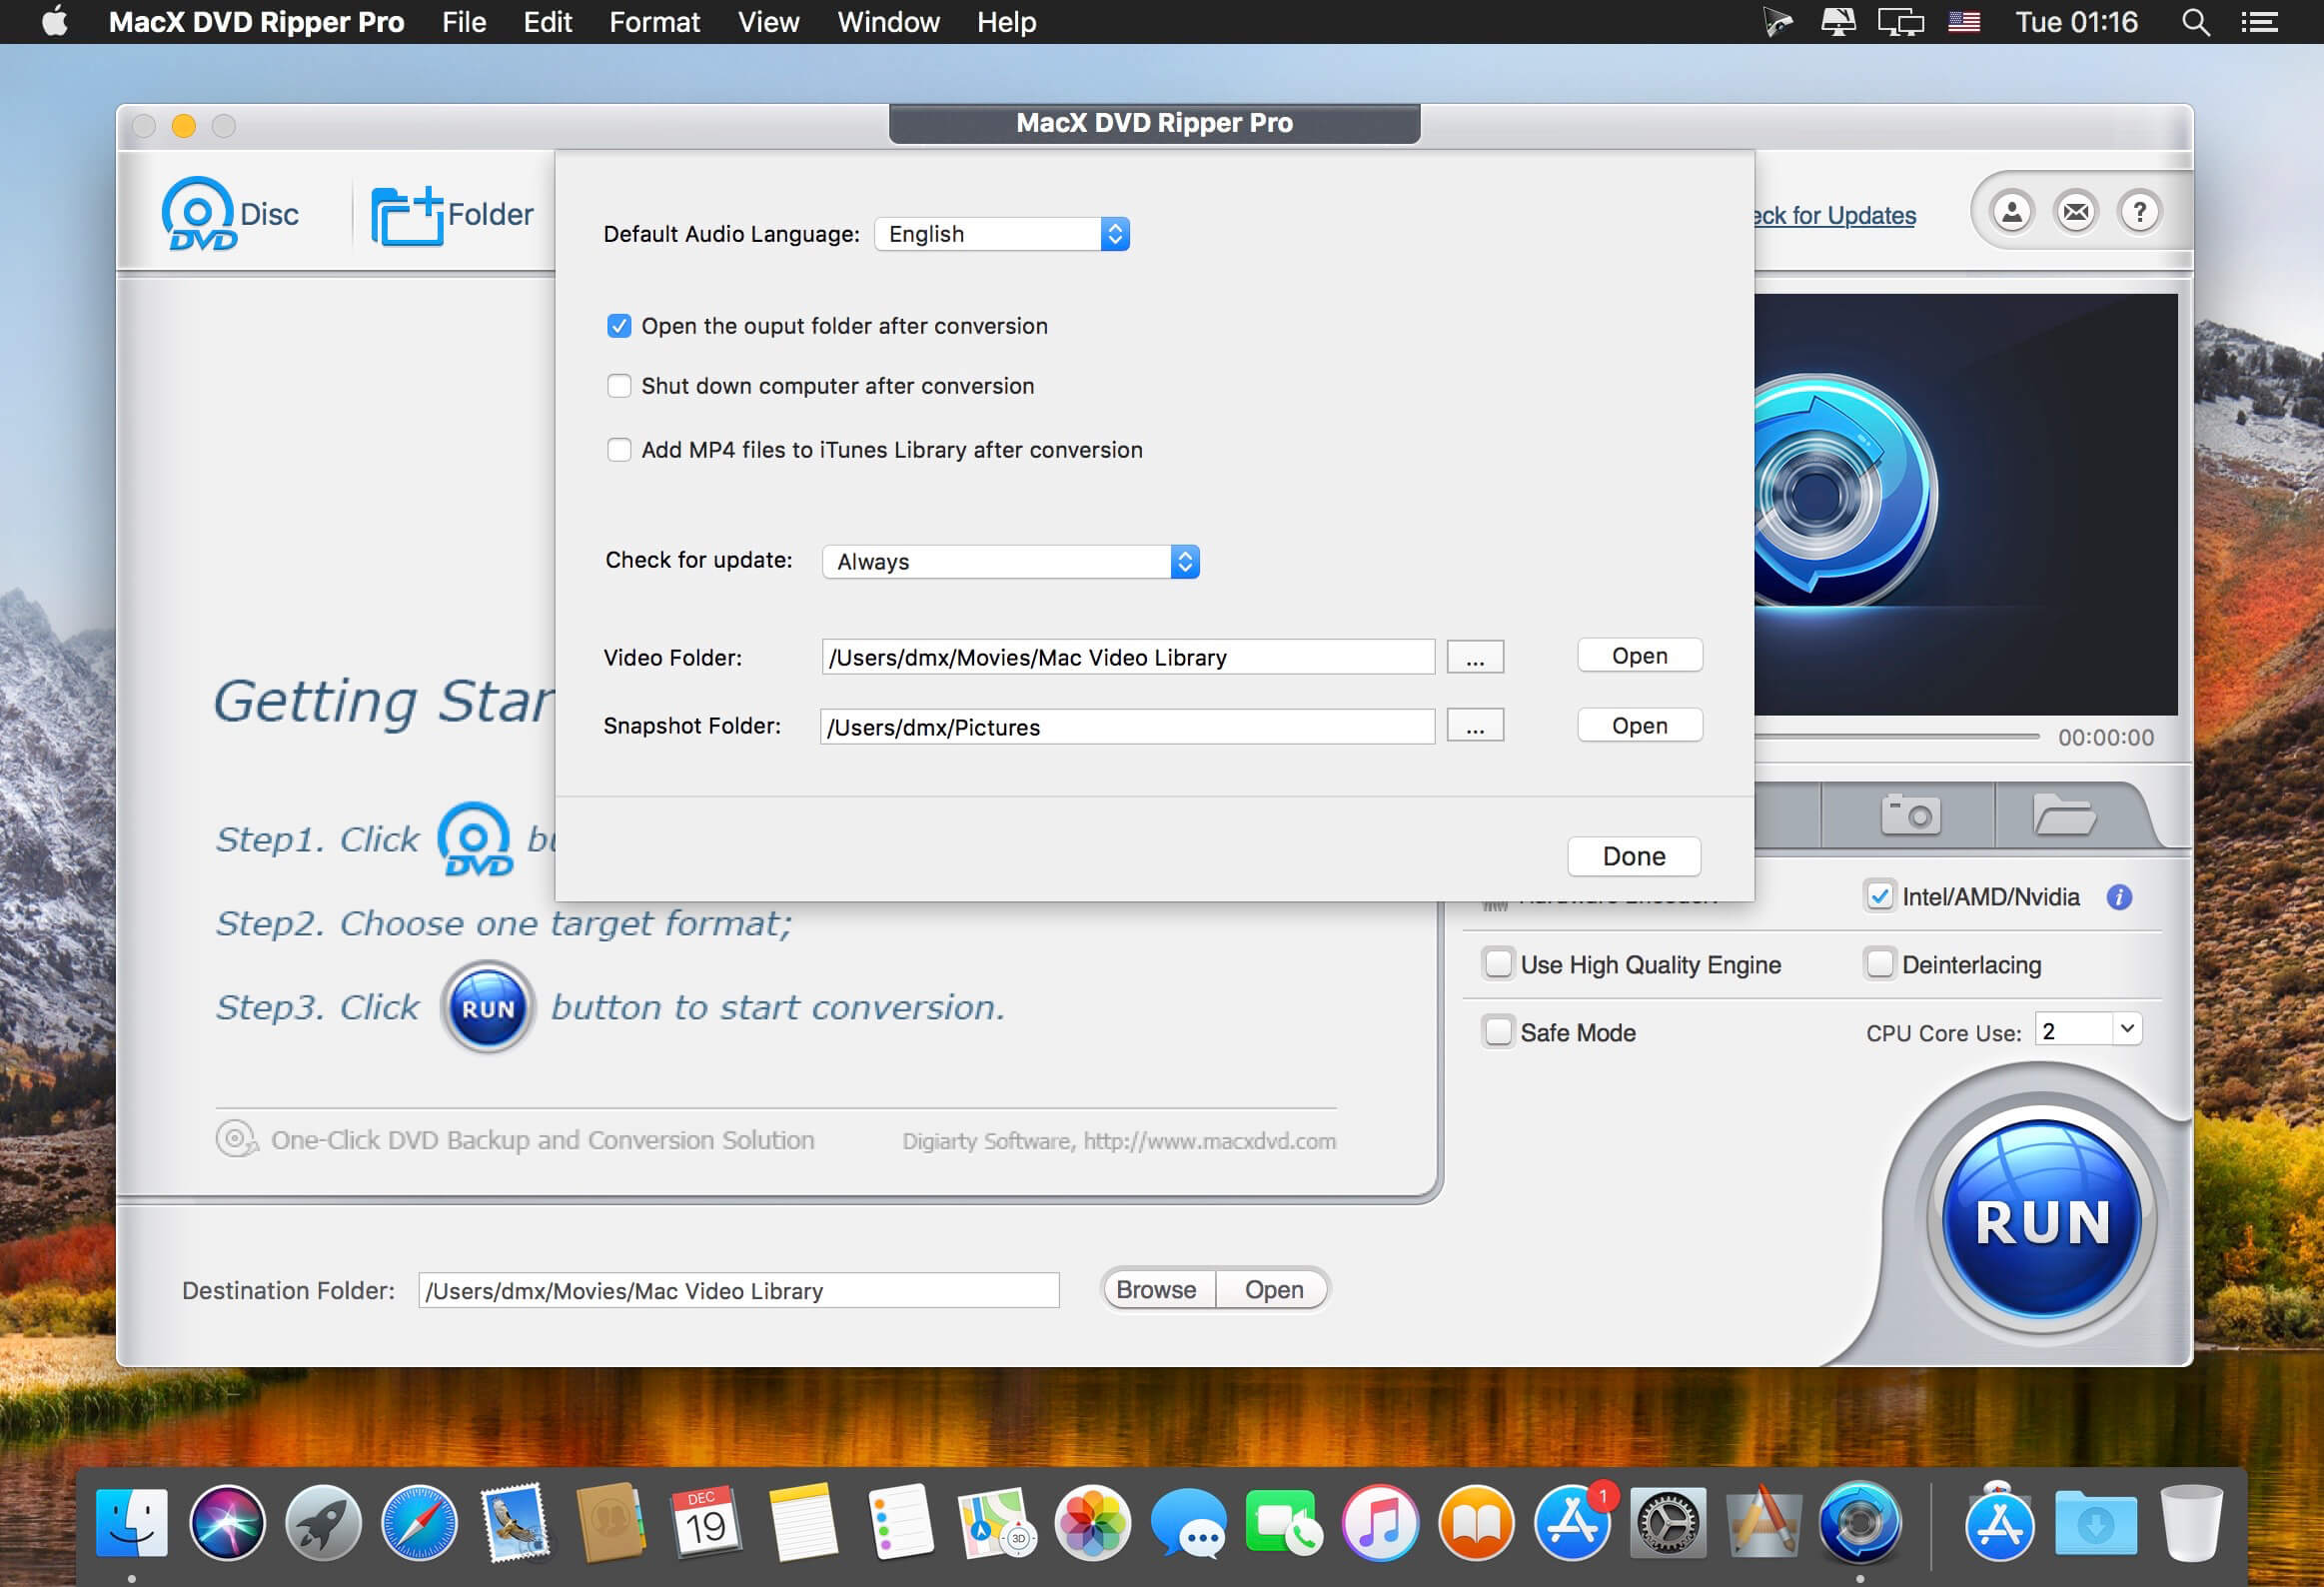 frostwire 5.7.6 for mac os x 10.7 download